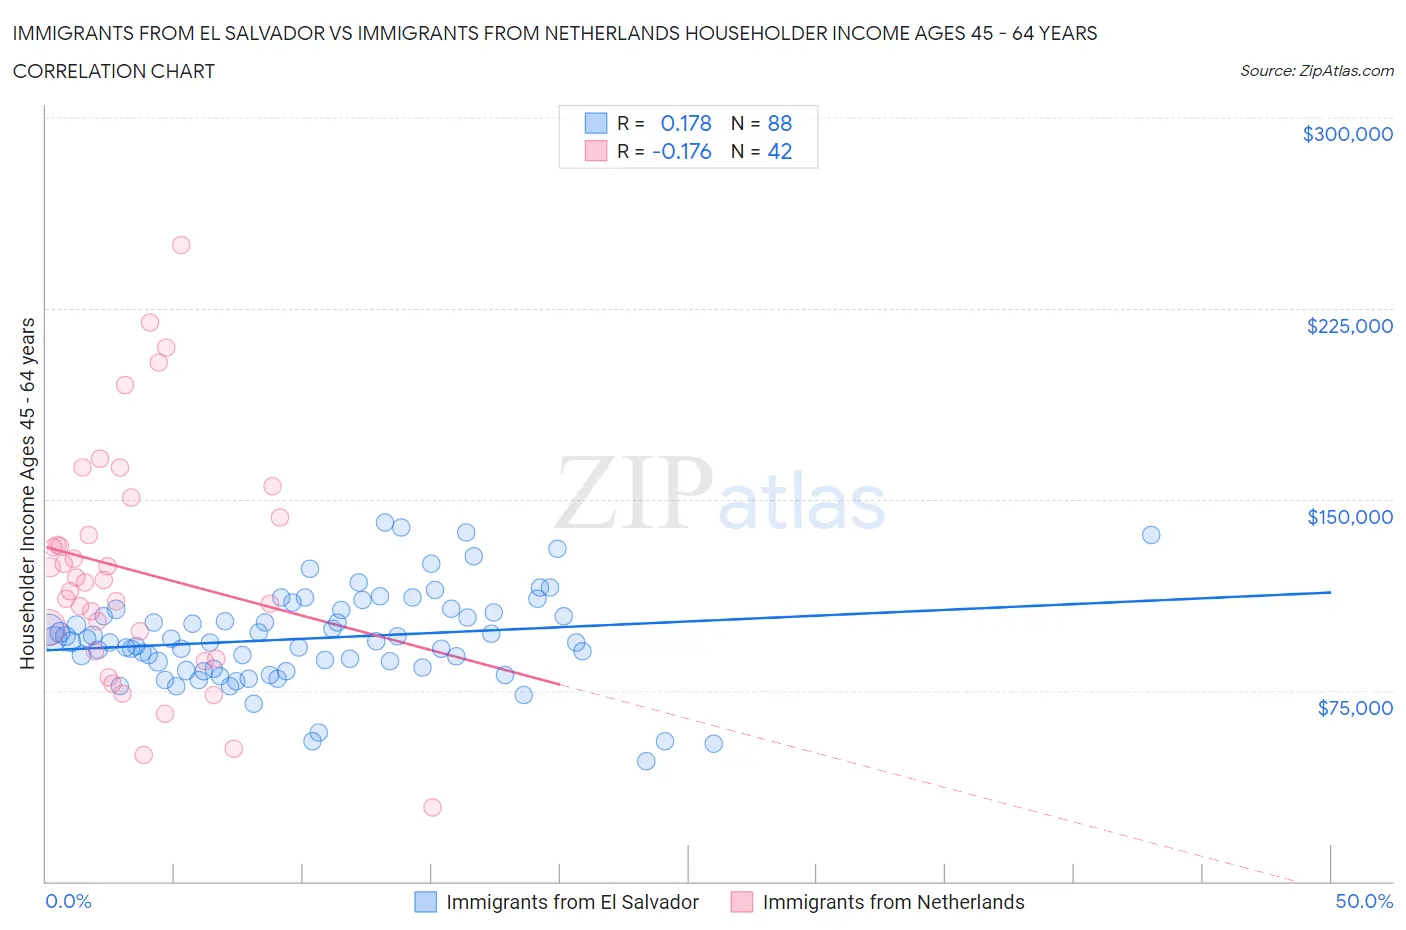 Immigrants from El Salvador vs Immigrants from Netherlands Householder Income Ages 45 - 64 years